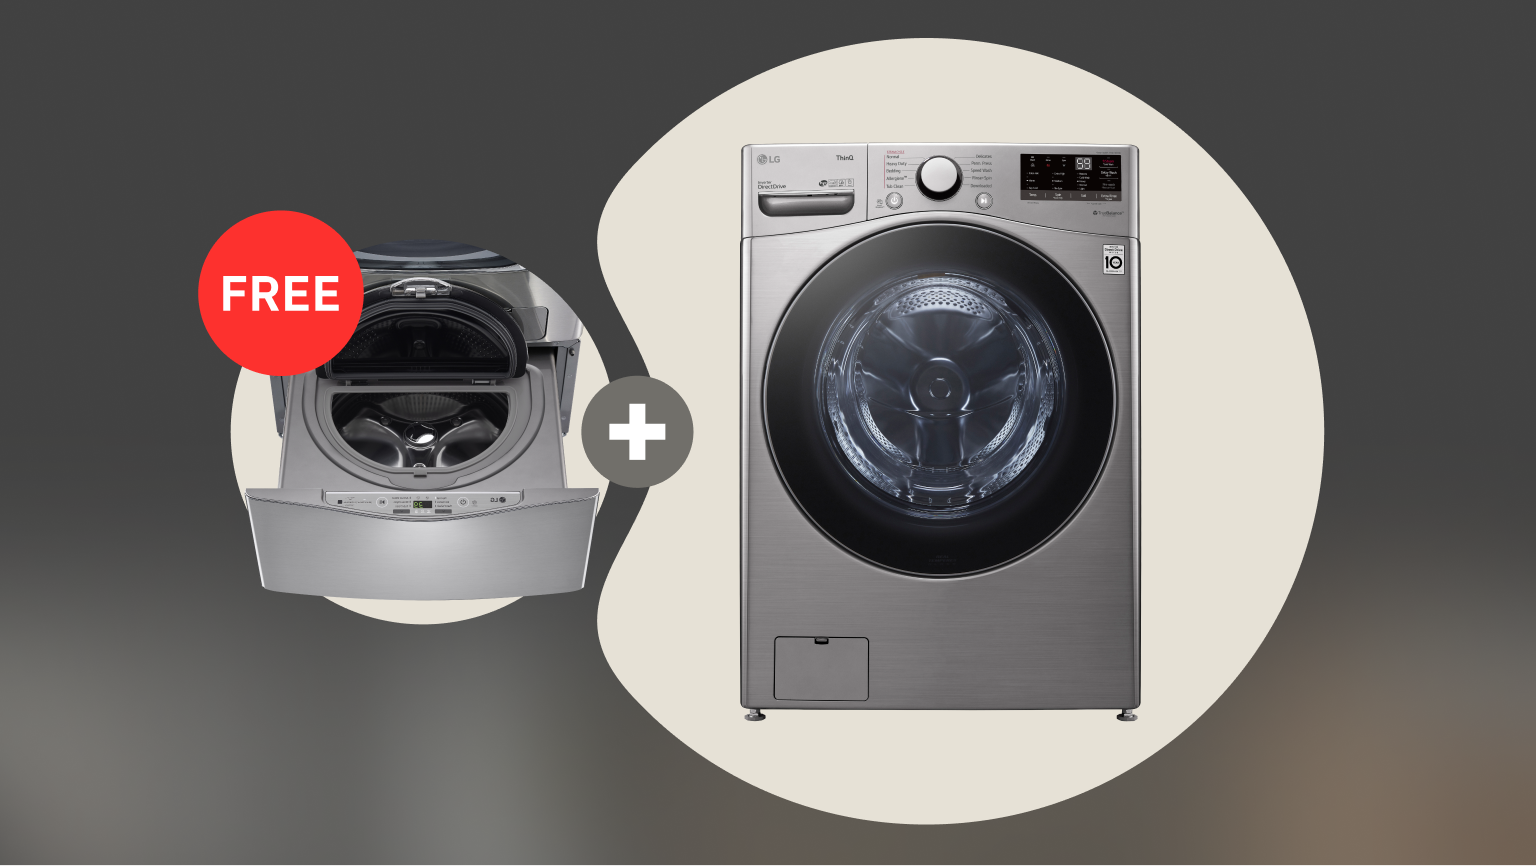 Free matching pedestal washer with select washer